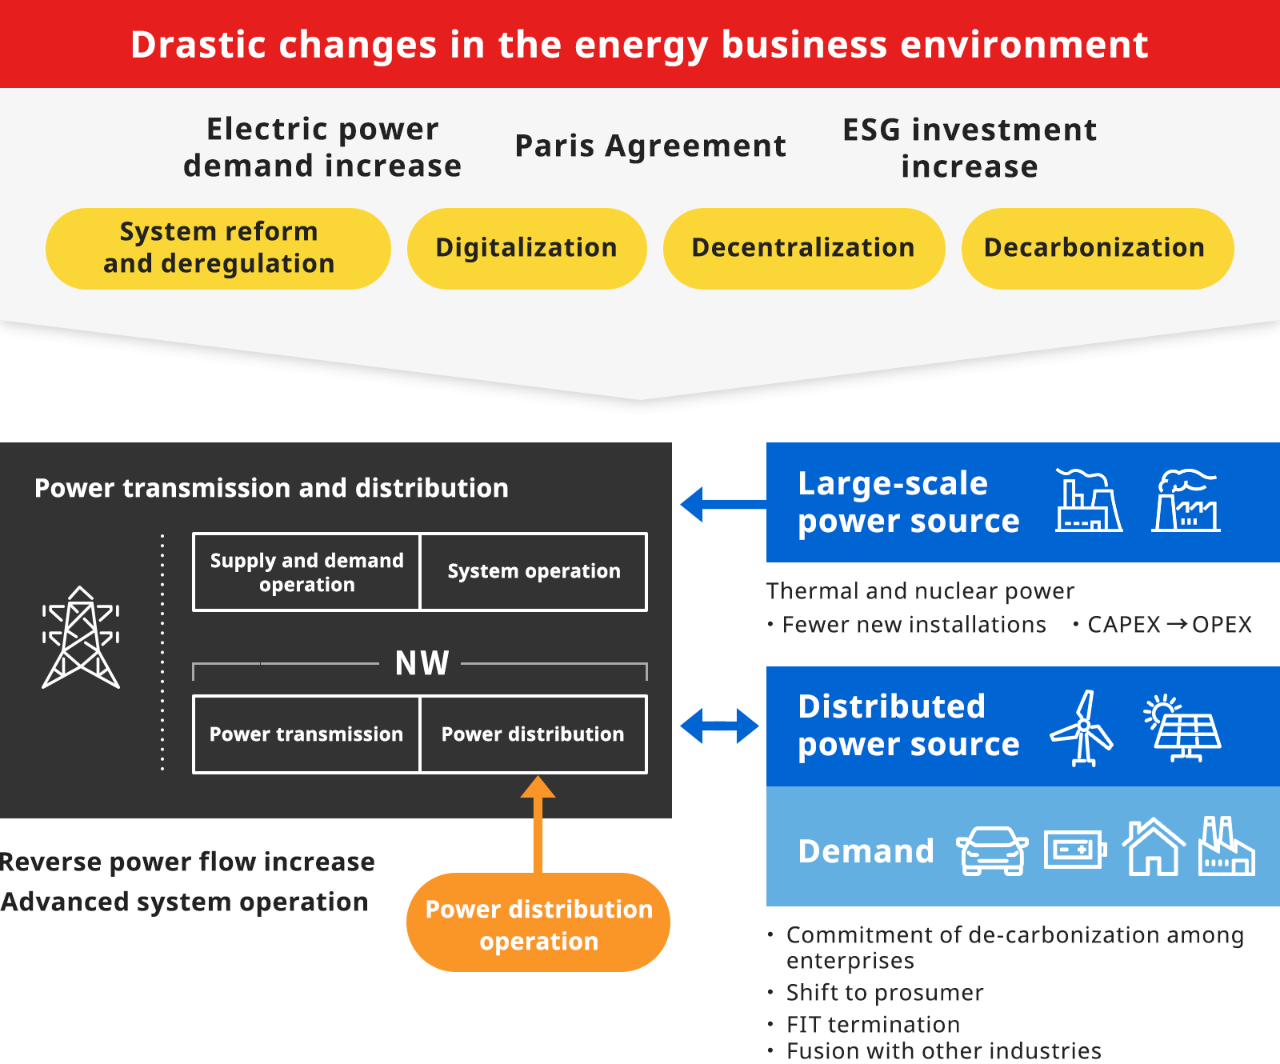 Drastic changes in the energy business environment